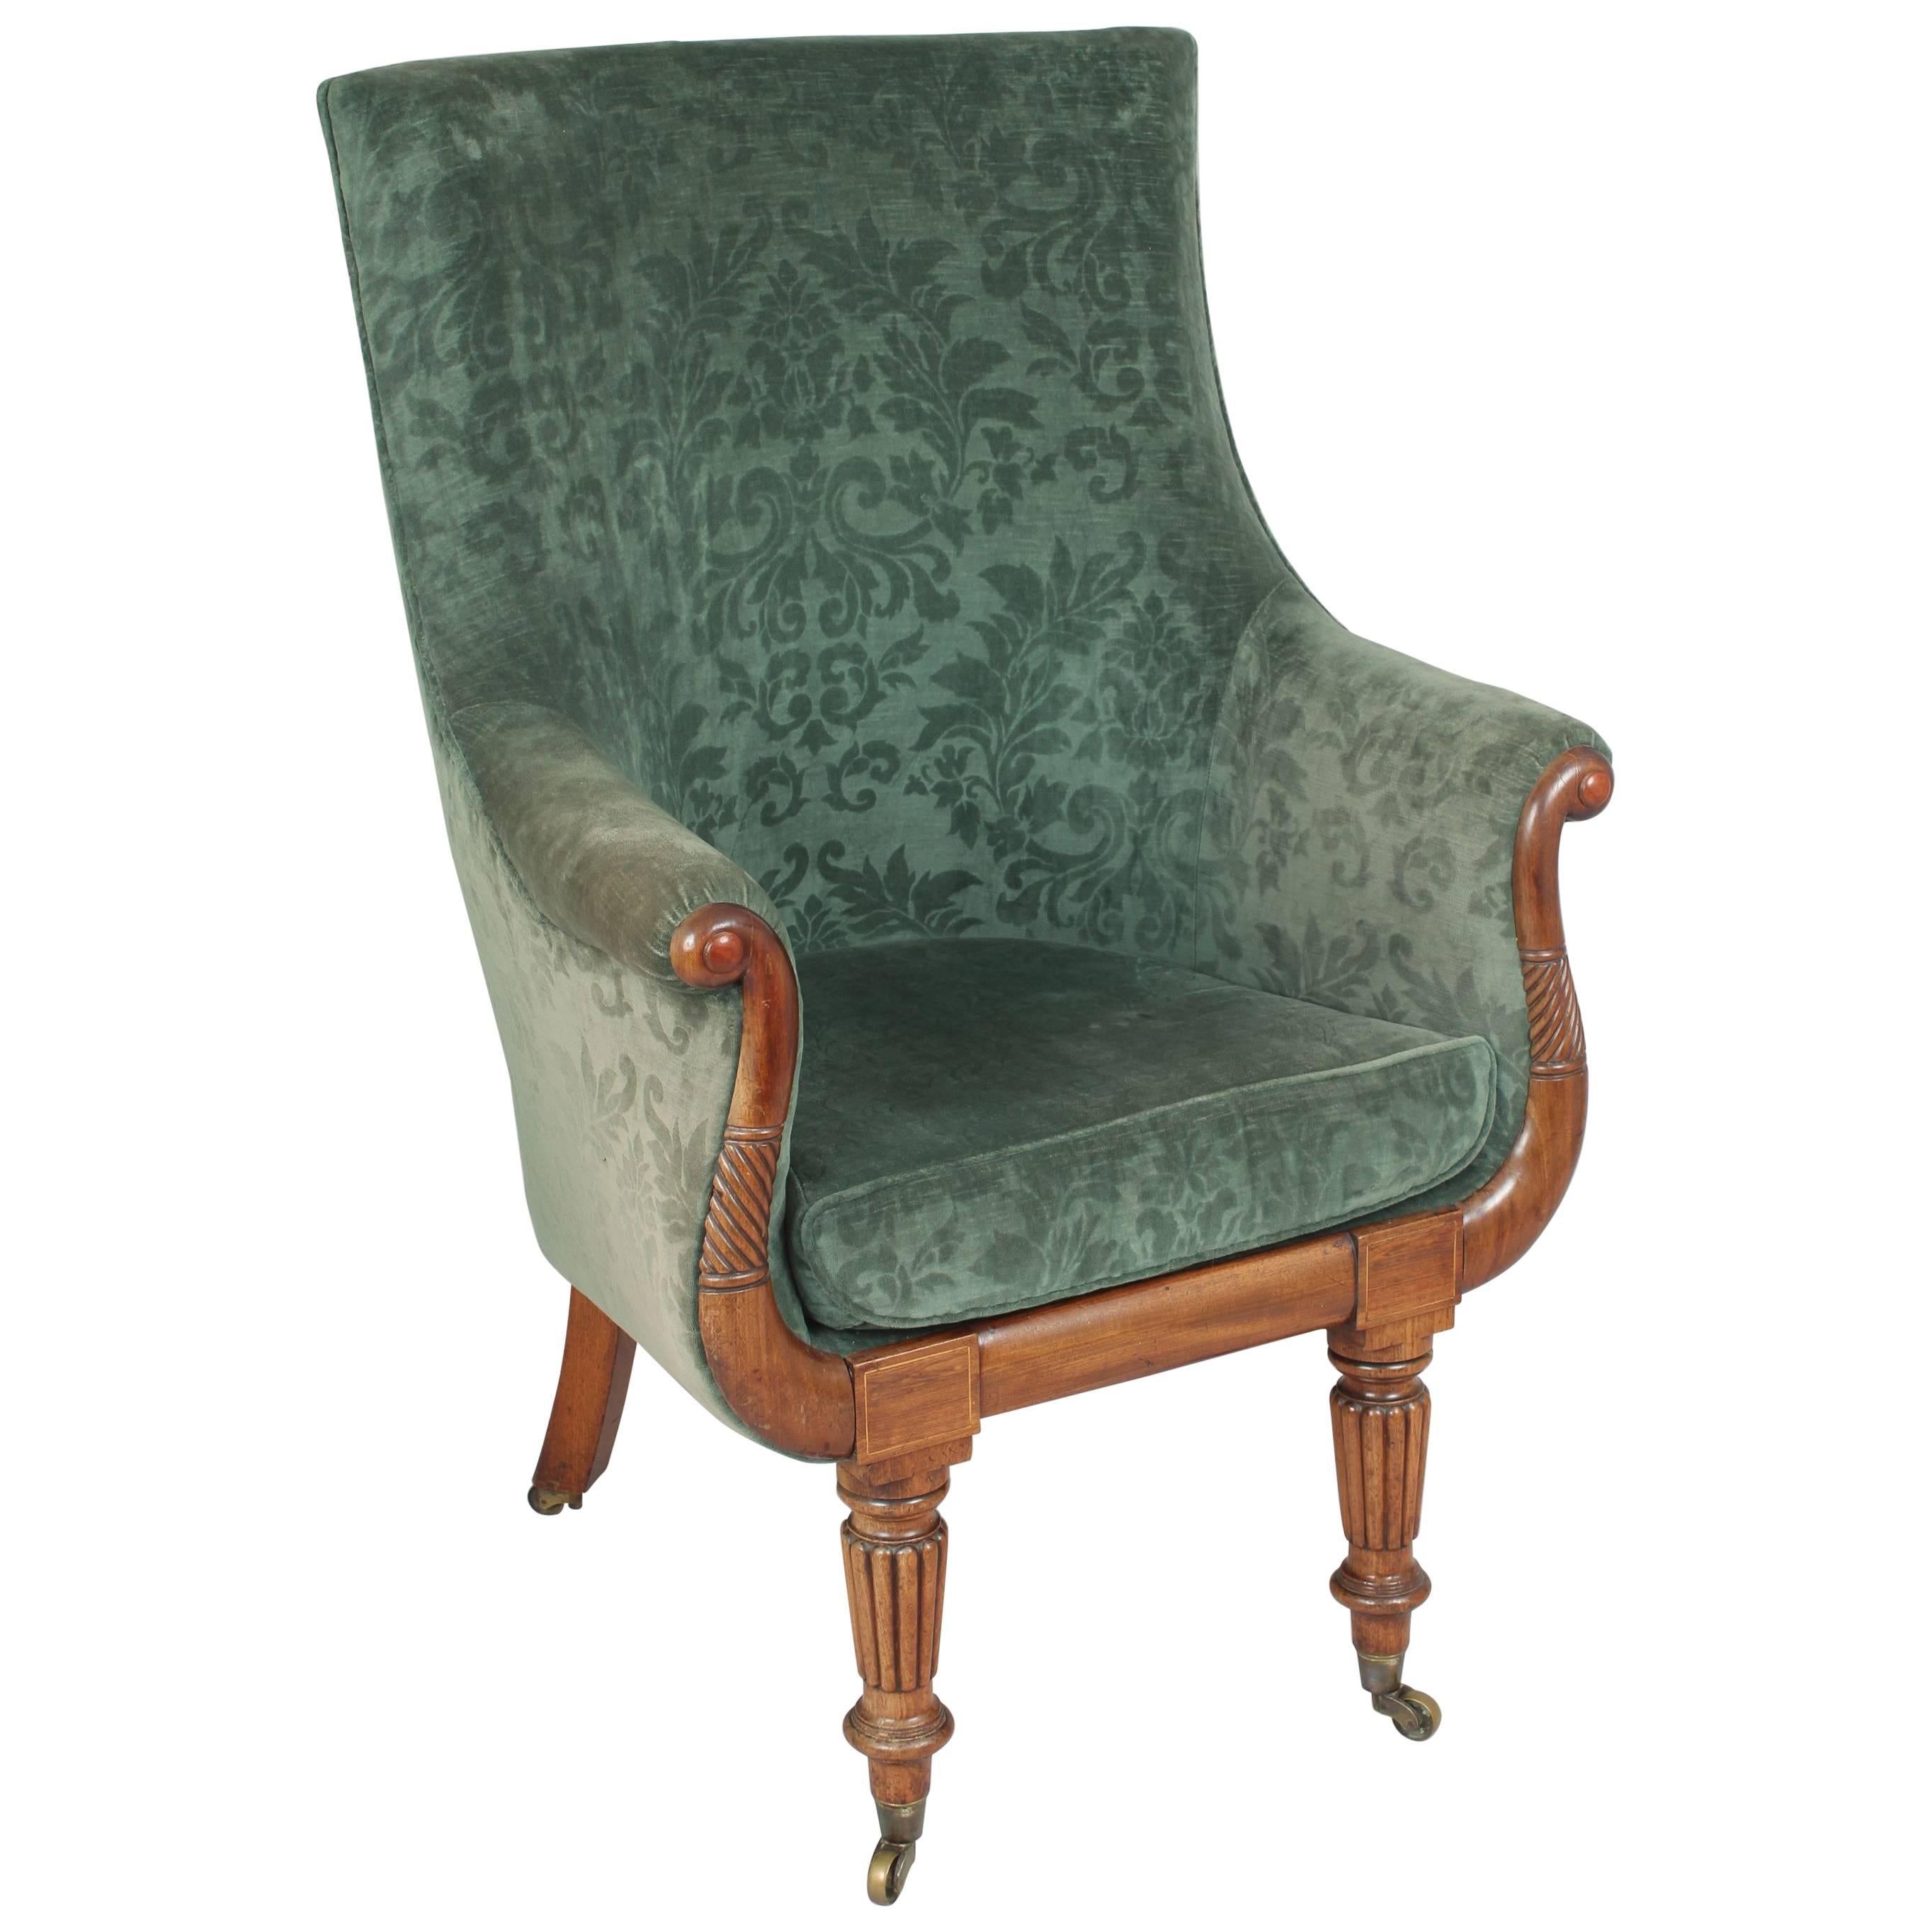 William IV Period Tall-Backed Easy-Chair For Sale